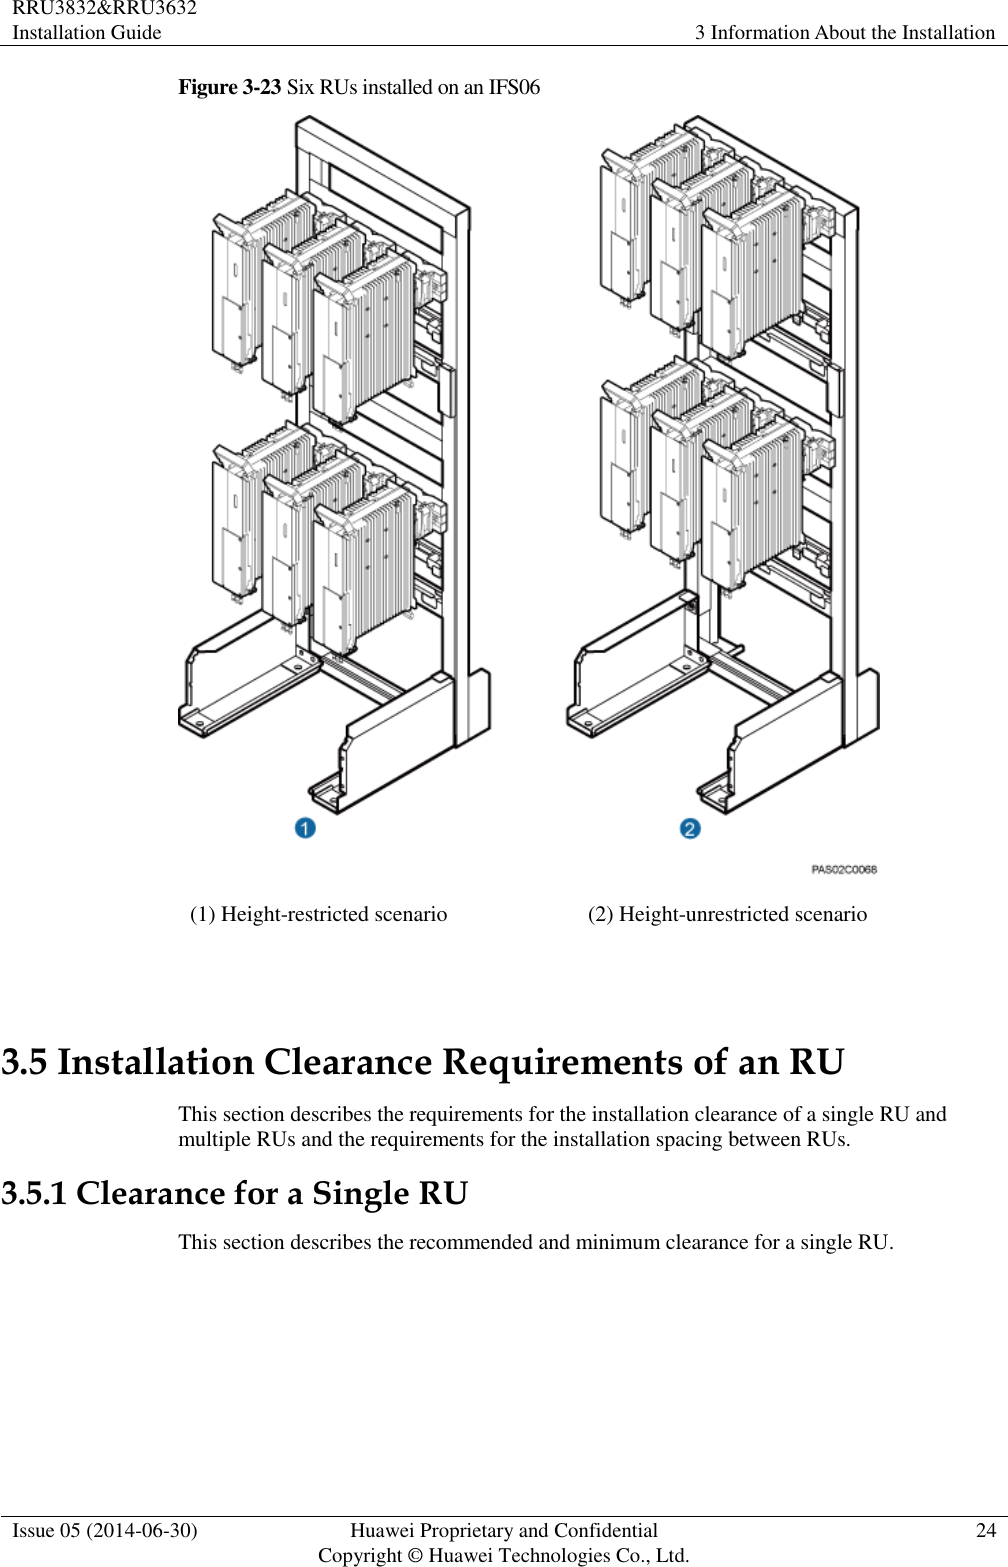 RRU3832&amp;RRU3632 Installation Guide 3 Information About the Installation  Issue 05 (2014-06-30) Huawei Proprietary and Confidential                                     Copyright © Huawei Technologies Co., Ltd. 24  Figure 3-23 Six RUs installed on an IFS06  (1) Height-restricted scenario (2) Height-unrestricted scenario  3.5 Installation Clearance Requirements of an RU This section describes the requirements for the installation clearance of a single RU and multiple RUs and the requirements for the installation spacing between RUs. 3.5.1 Clearance for a Single RU This section describes the recommended and minimum clearance for a single RU.  